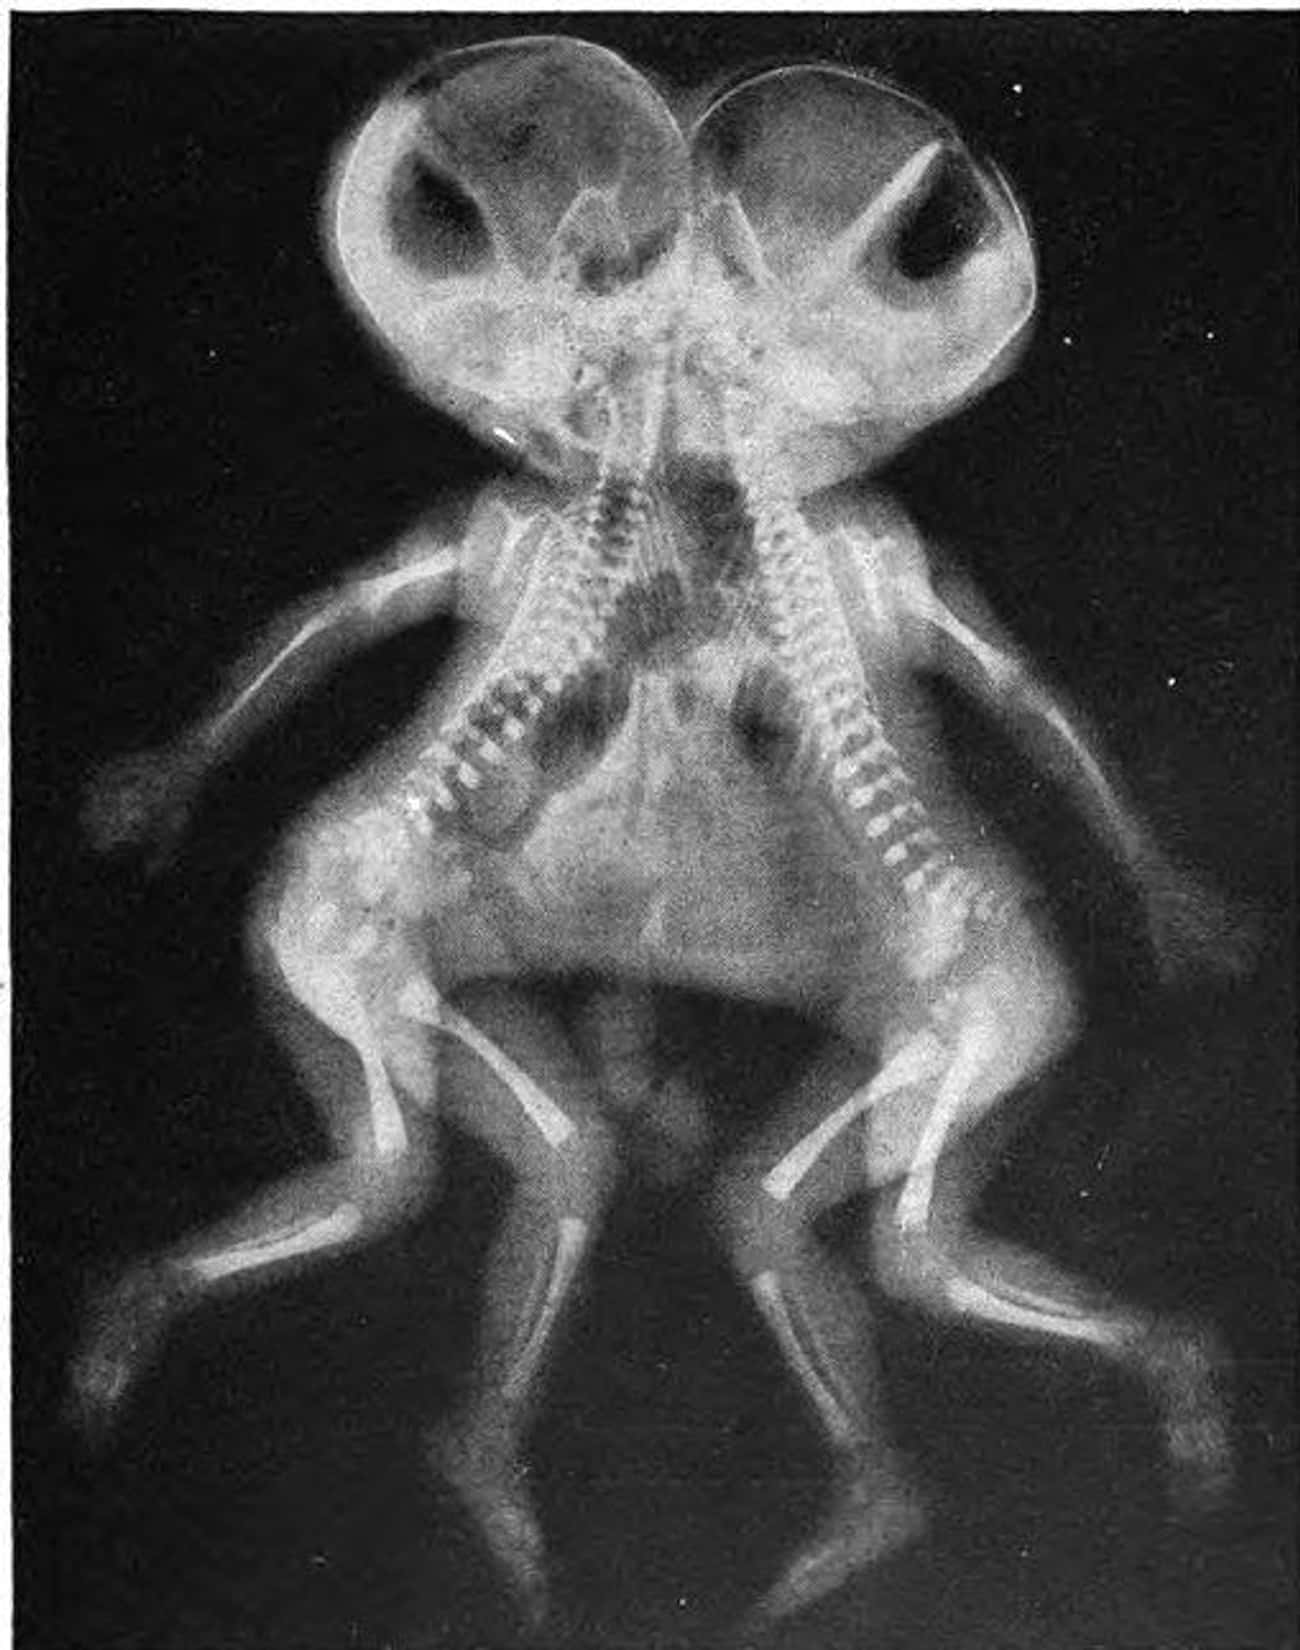 Conjoined Twins Are Rare And Generally Stillborn